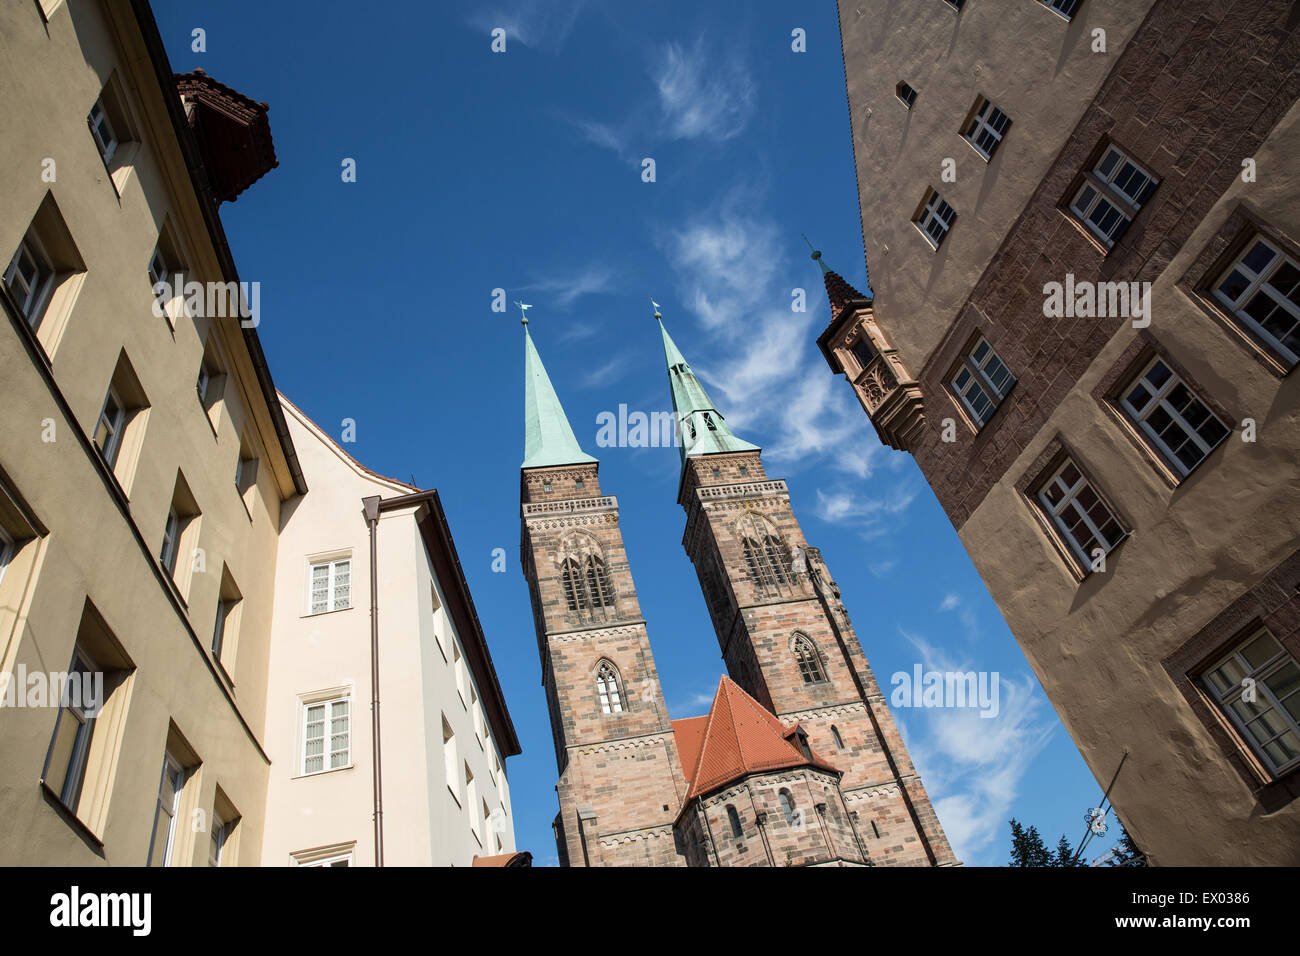 Low angle view of spires in old town, Nuremberg, Germany Stock Photo